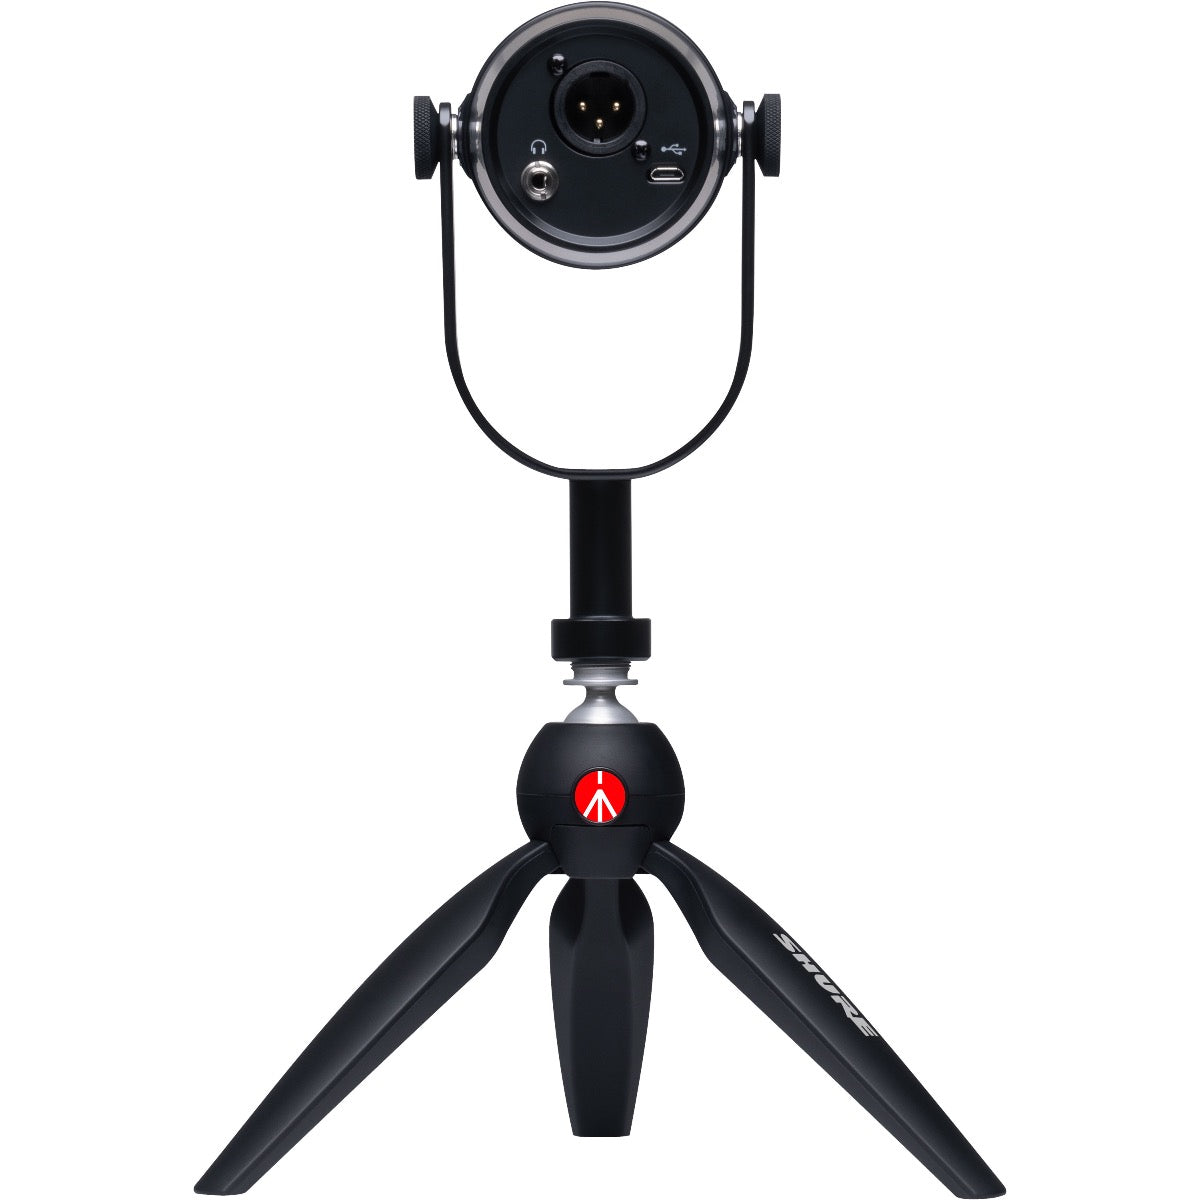 Rear view of Shure MV7 Podcast Microphone Kit with Manfrotto Desktop Tripod